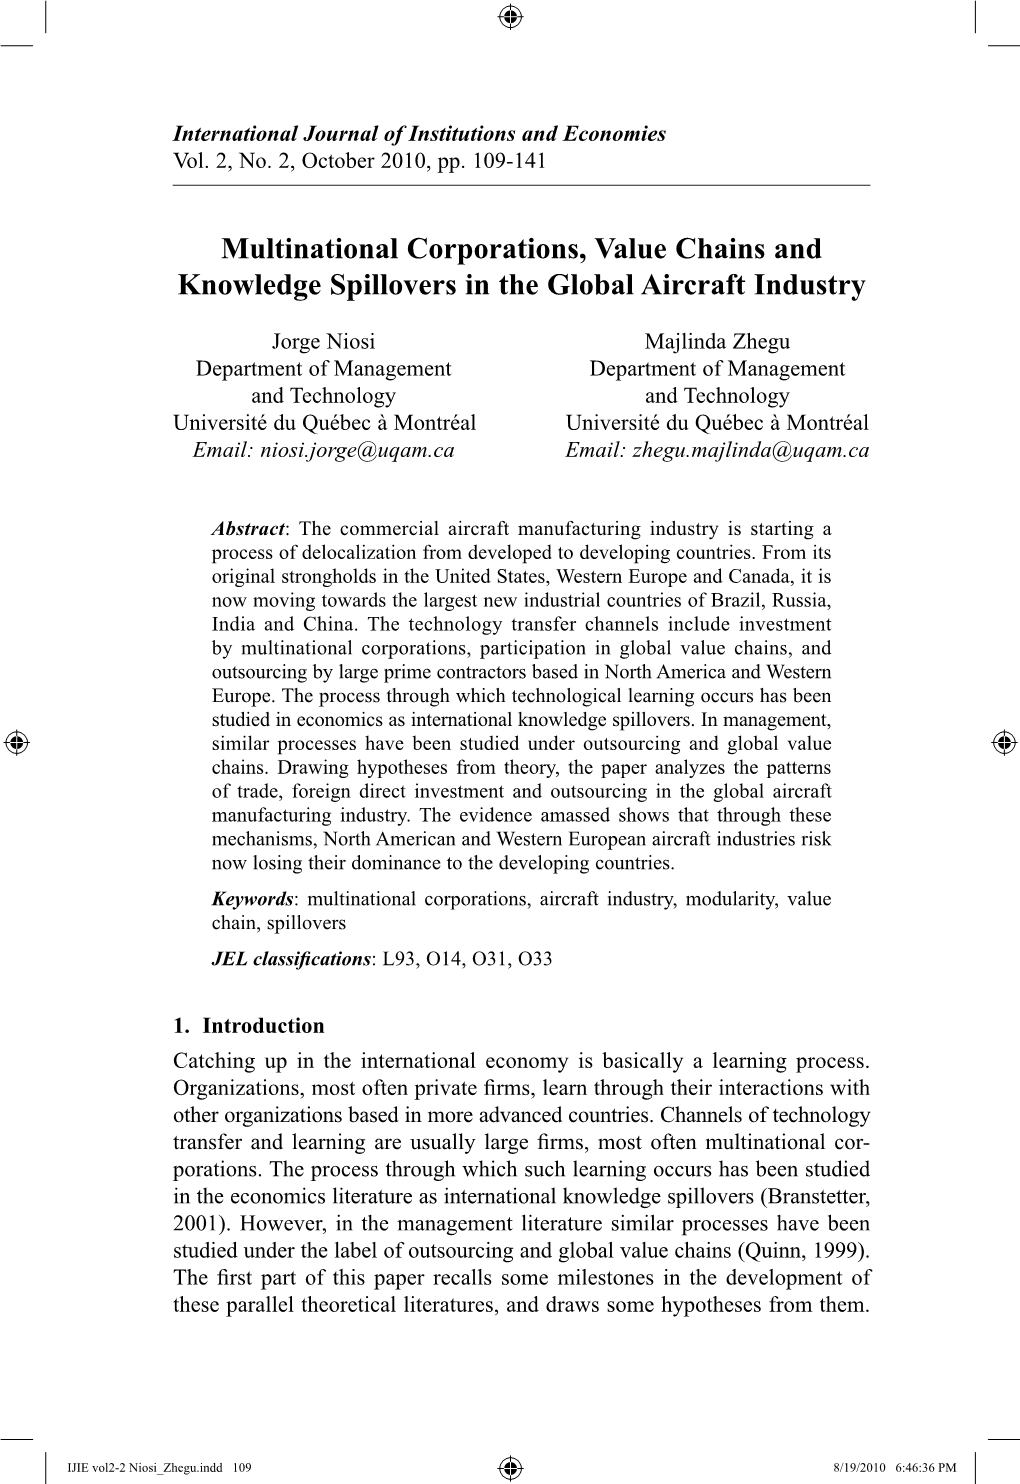 Multinational Corporations, Value Chains and Knowledge Spillovers in the Global Aircraft Industry